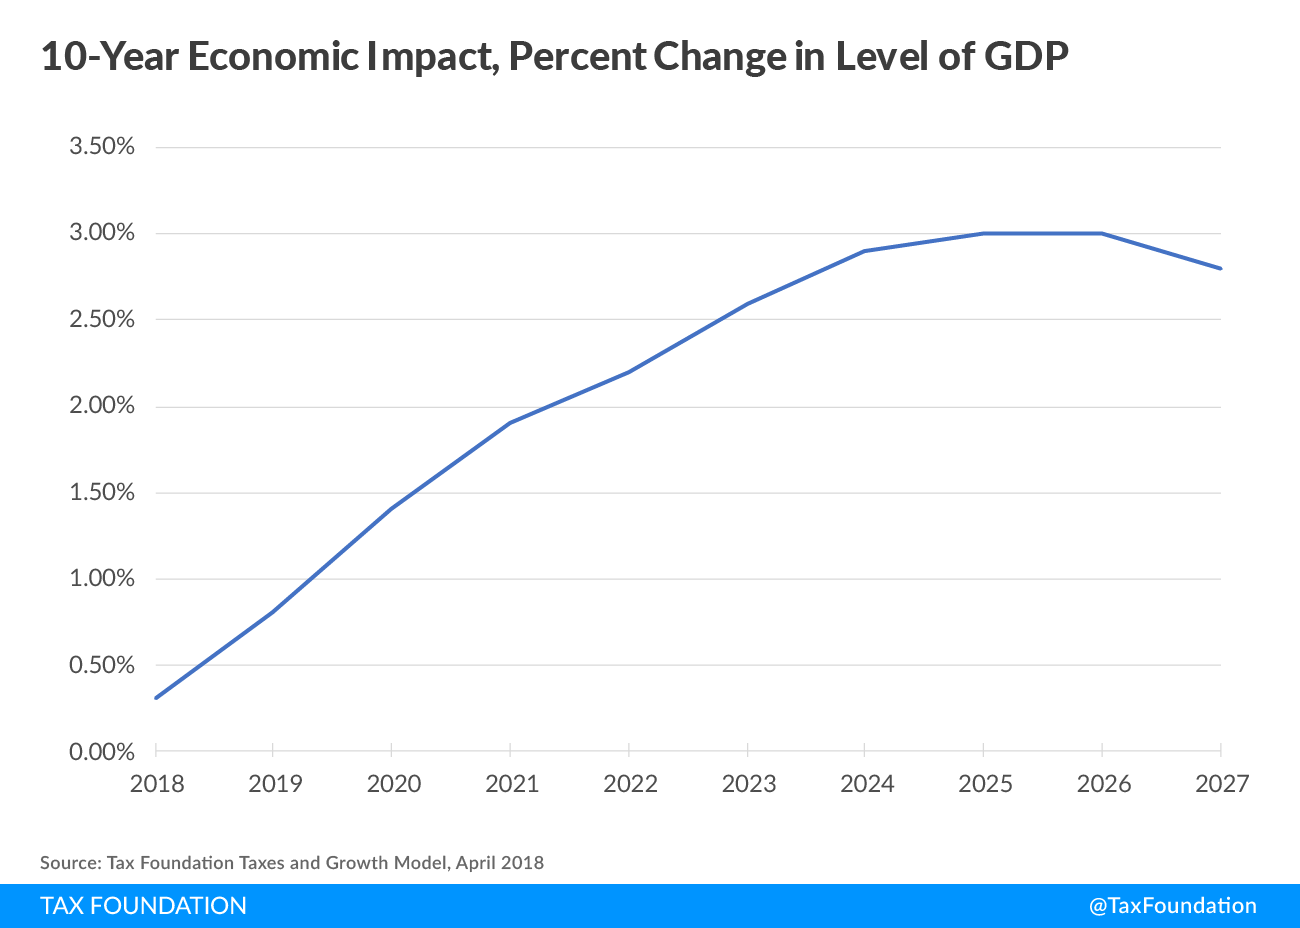 10-year economic impact, percent change in level of GDP